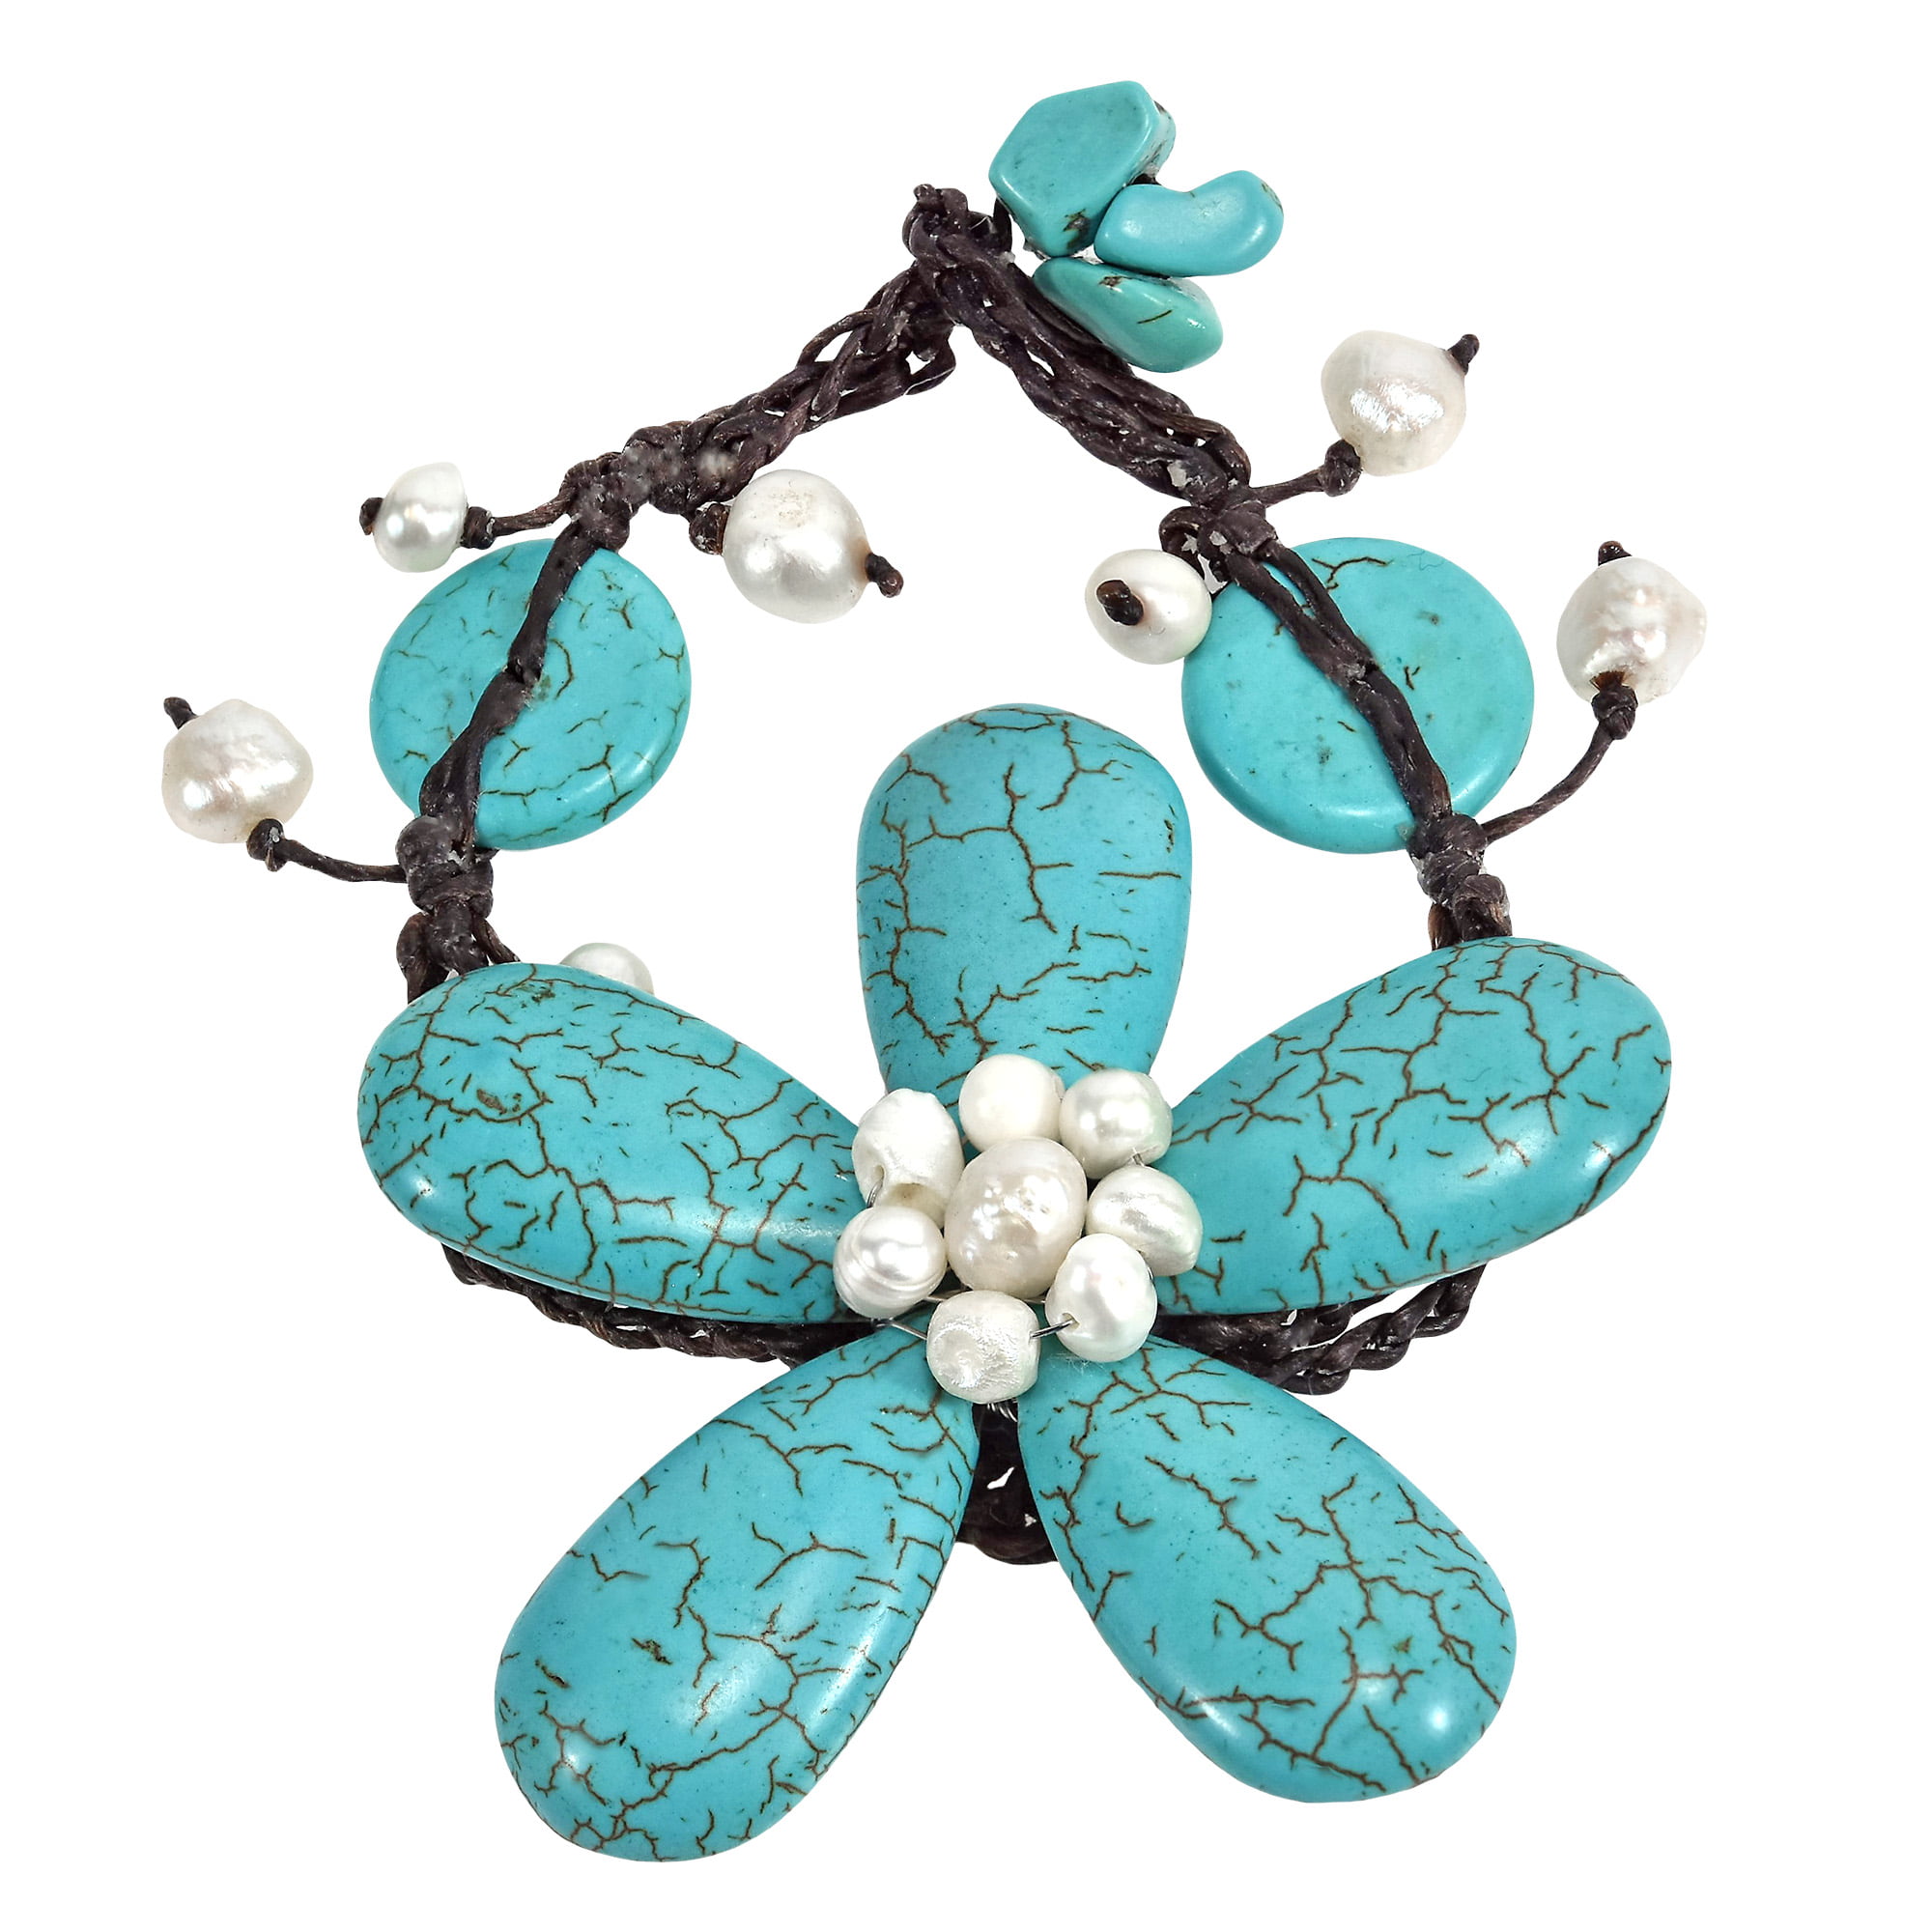 AeraVida White-Blue Blossom Reconstructed White Howlite & Simulated Turquoise Floral Cotton Wax Rope Link Bracelet 